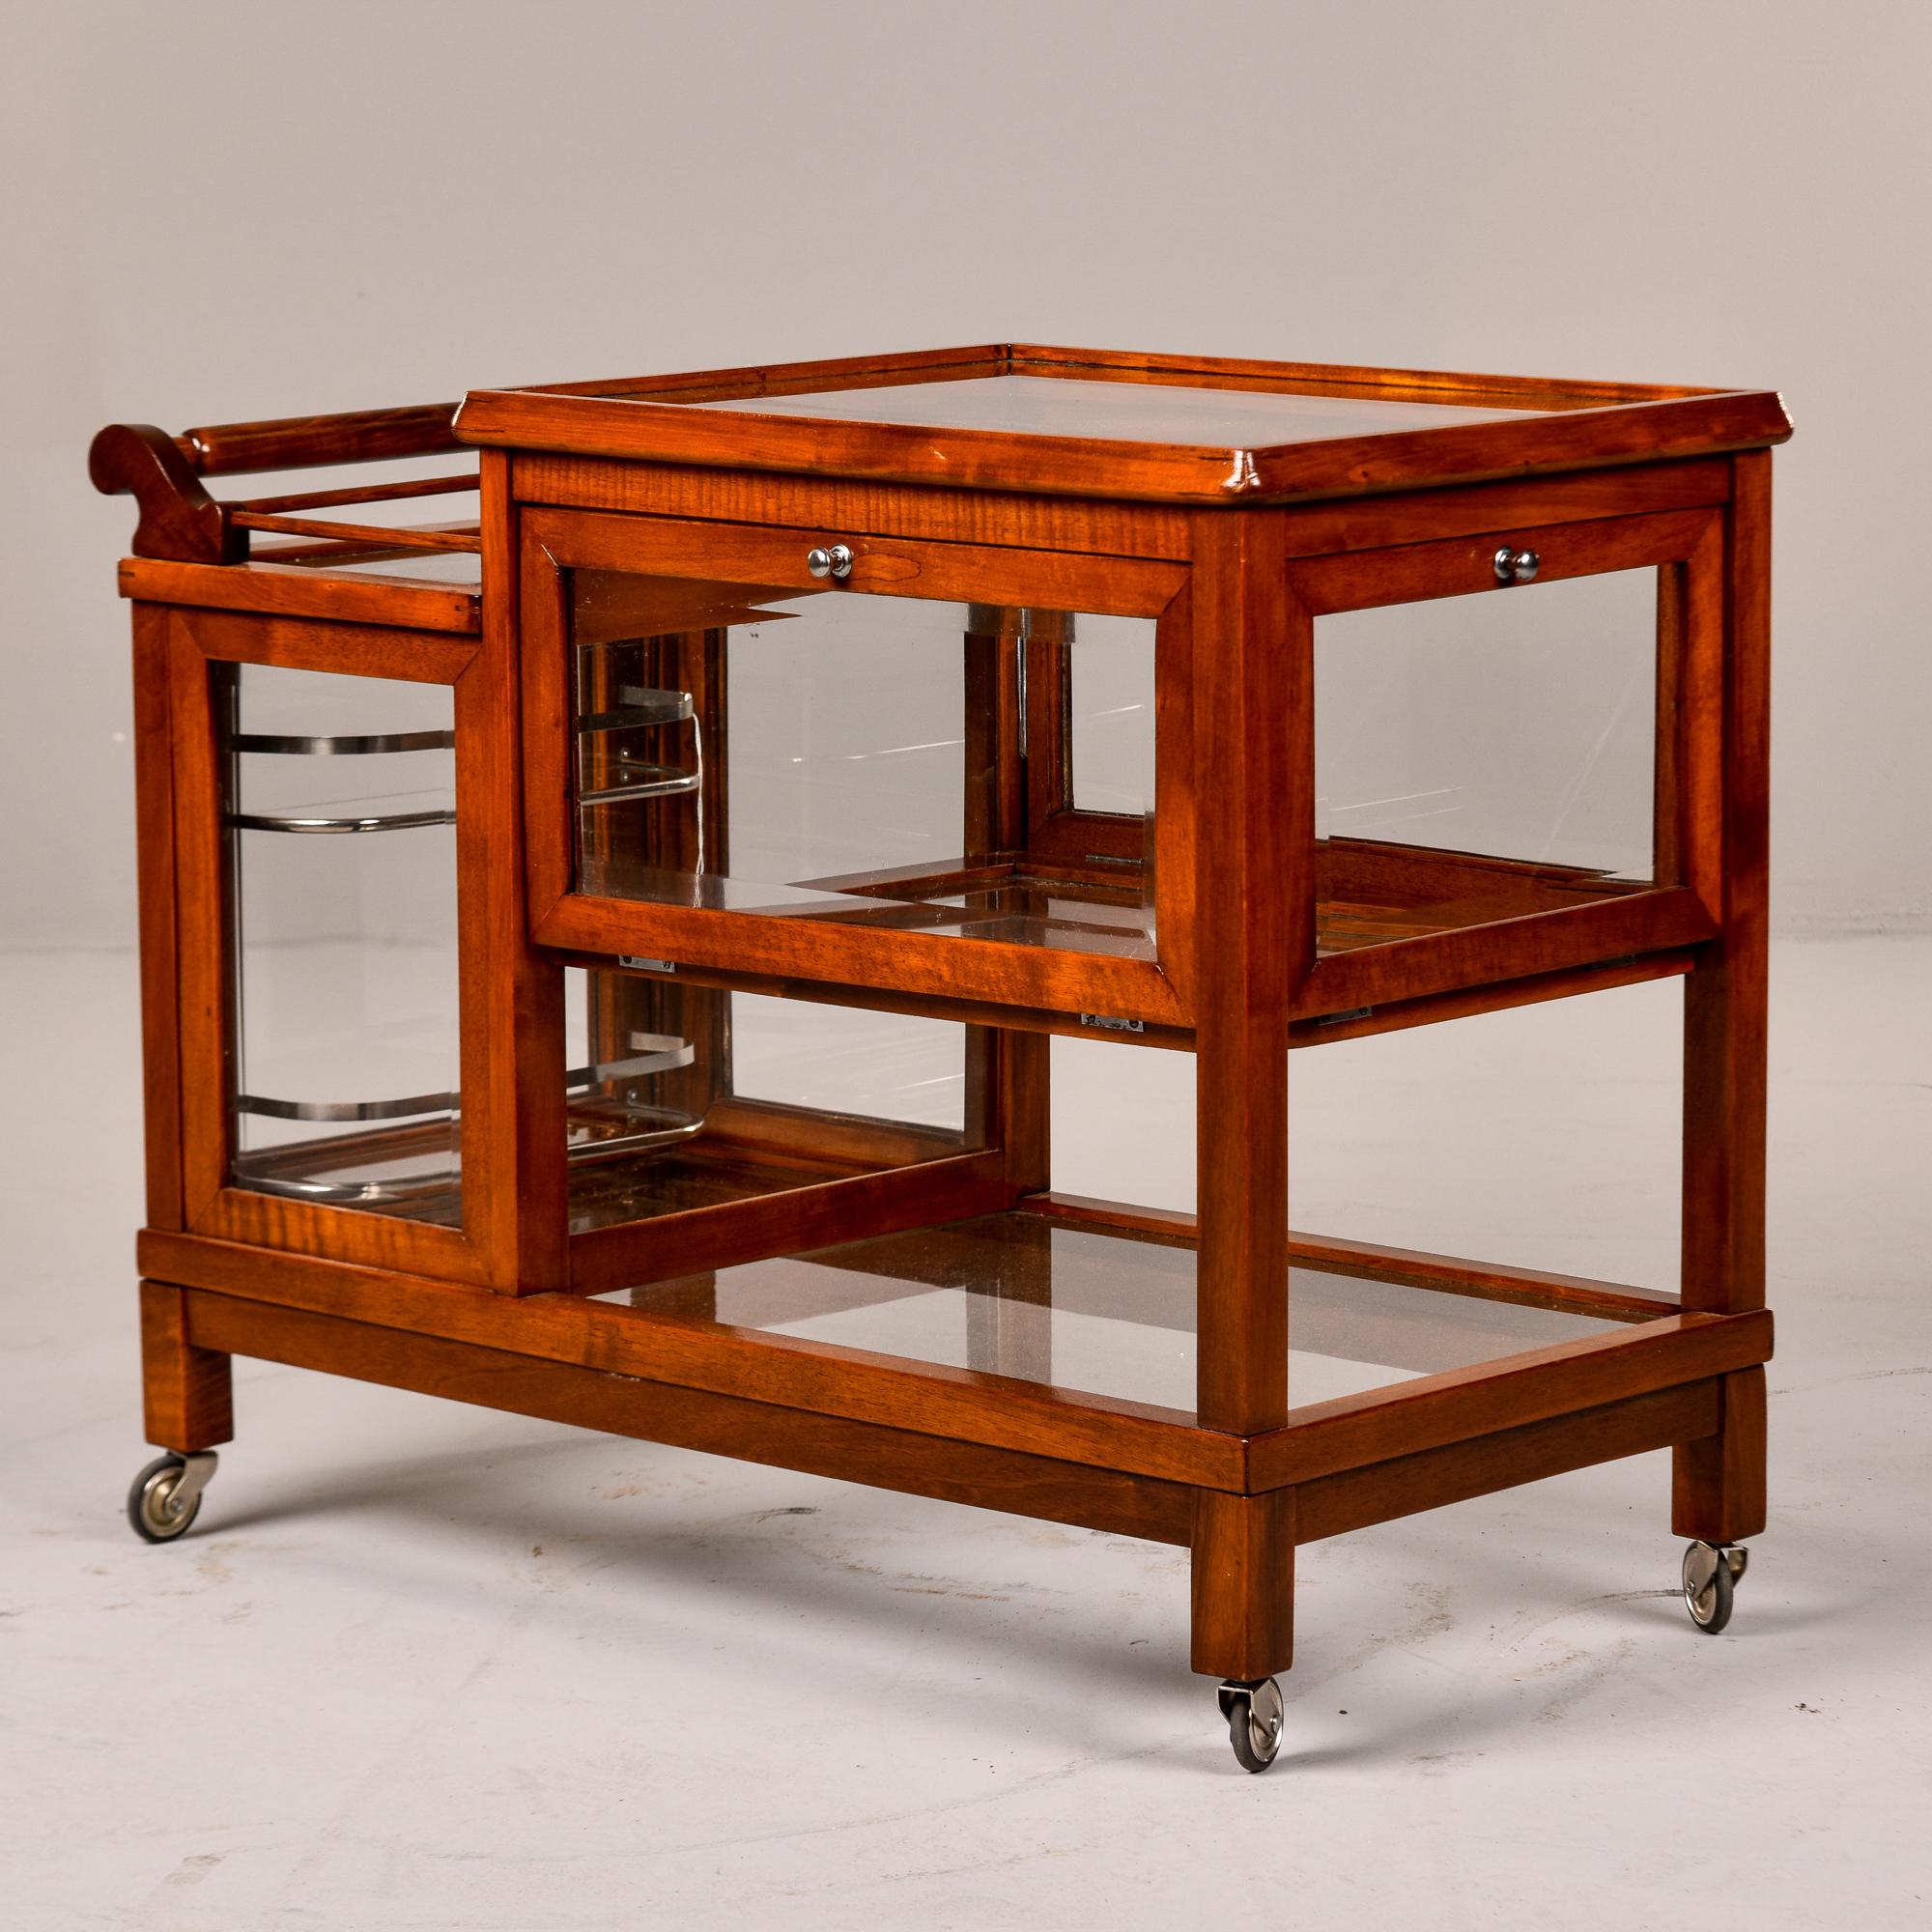 Found in England, this walnut and glass bar cart or trolley dates from the 1940s. Section with bottle rack and wood handle at the top has a locking glass door that opens. Top section of the taller part of the cart opens with drop down doors on both